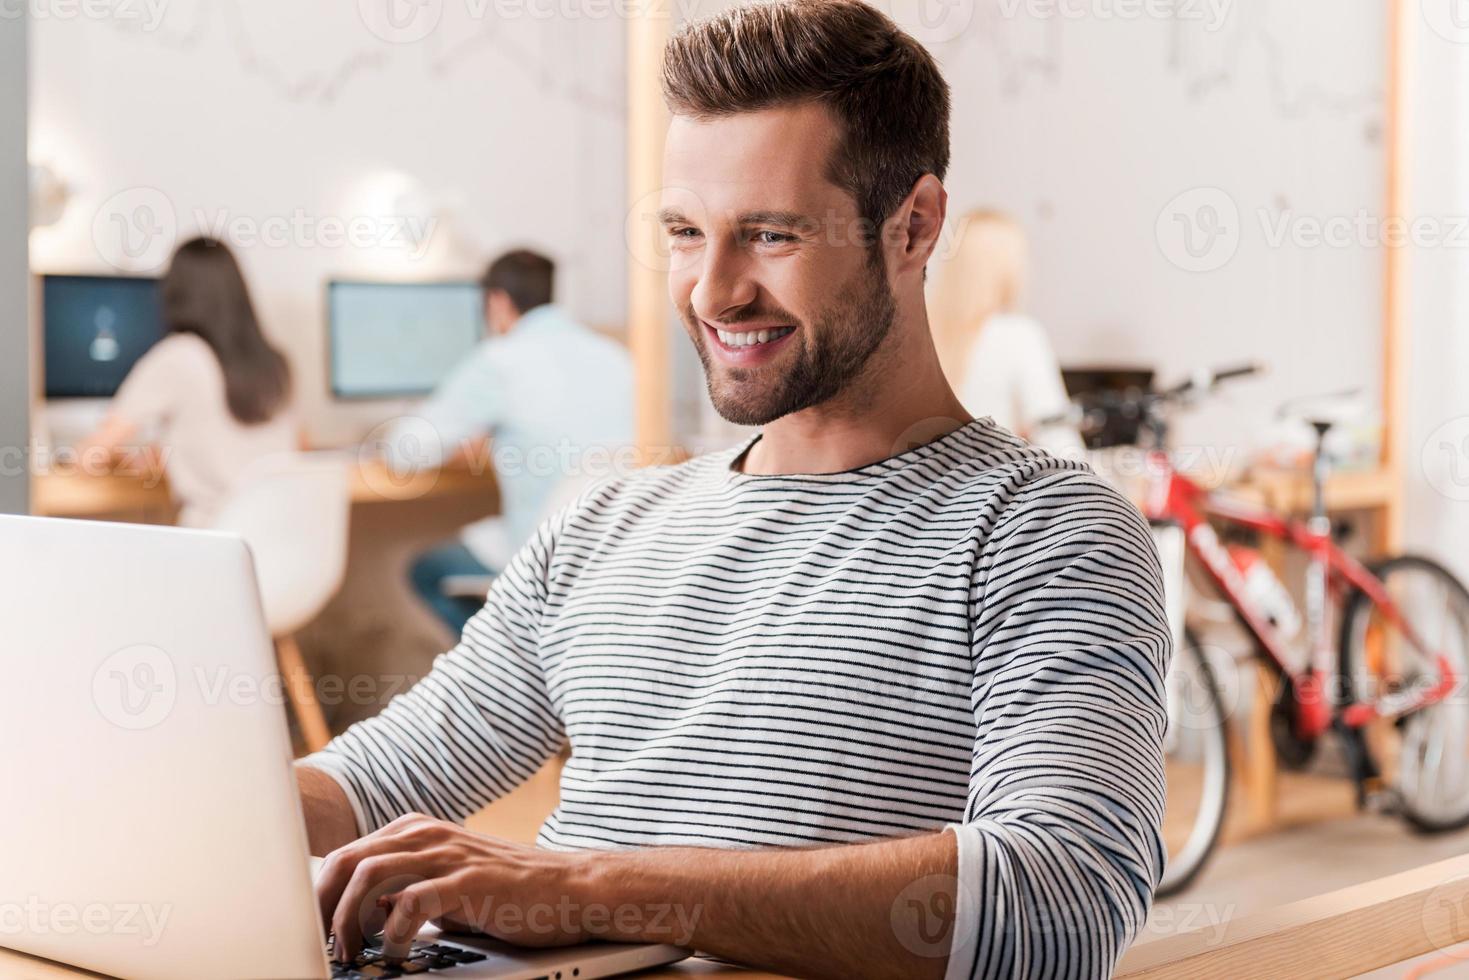 Working with pleasure. Handsome young man working on laptop and smiling while his colleagues working in the background photo